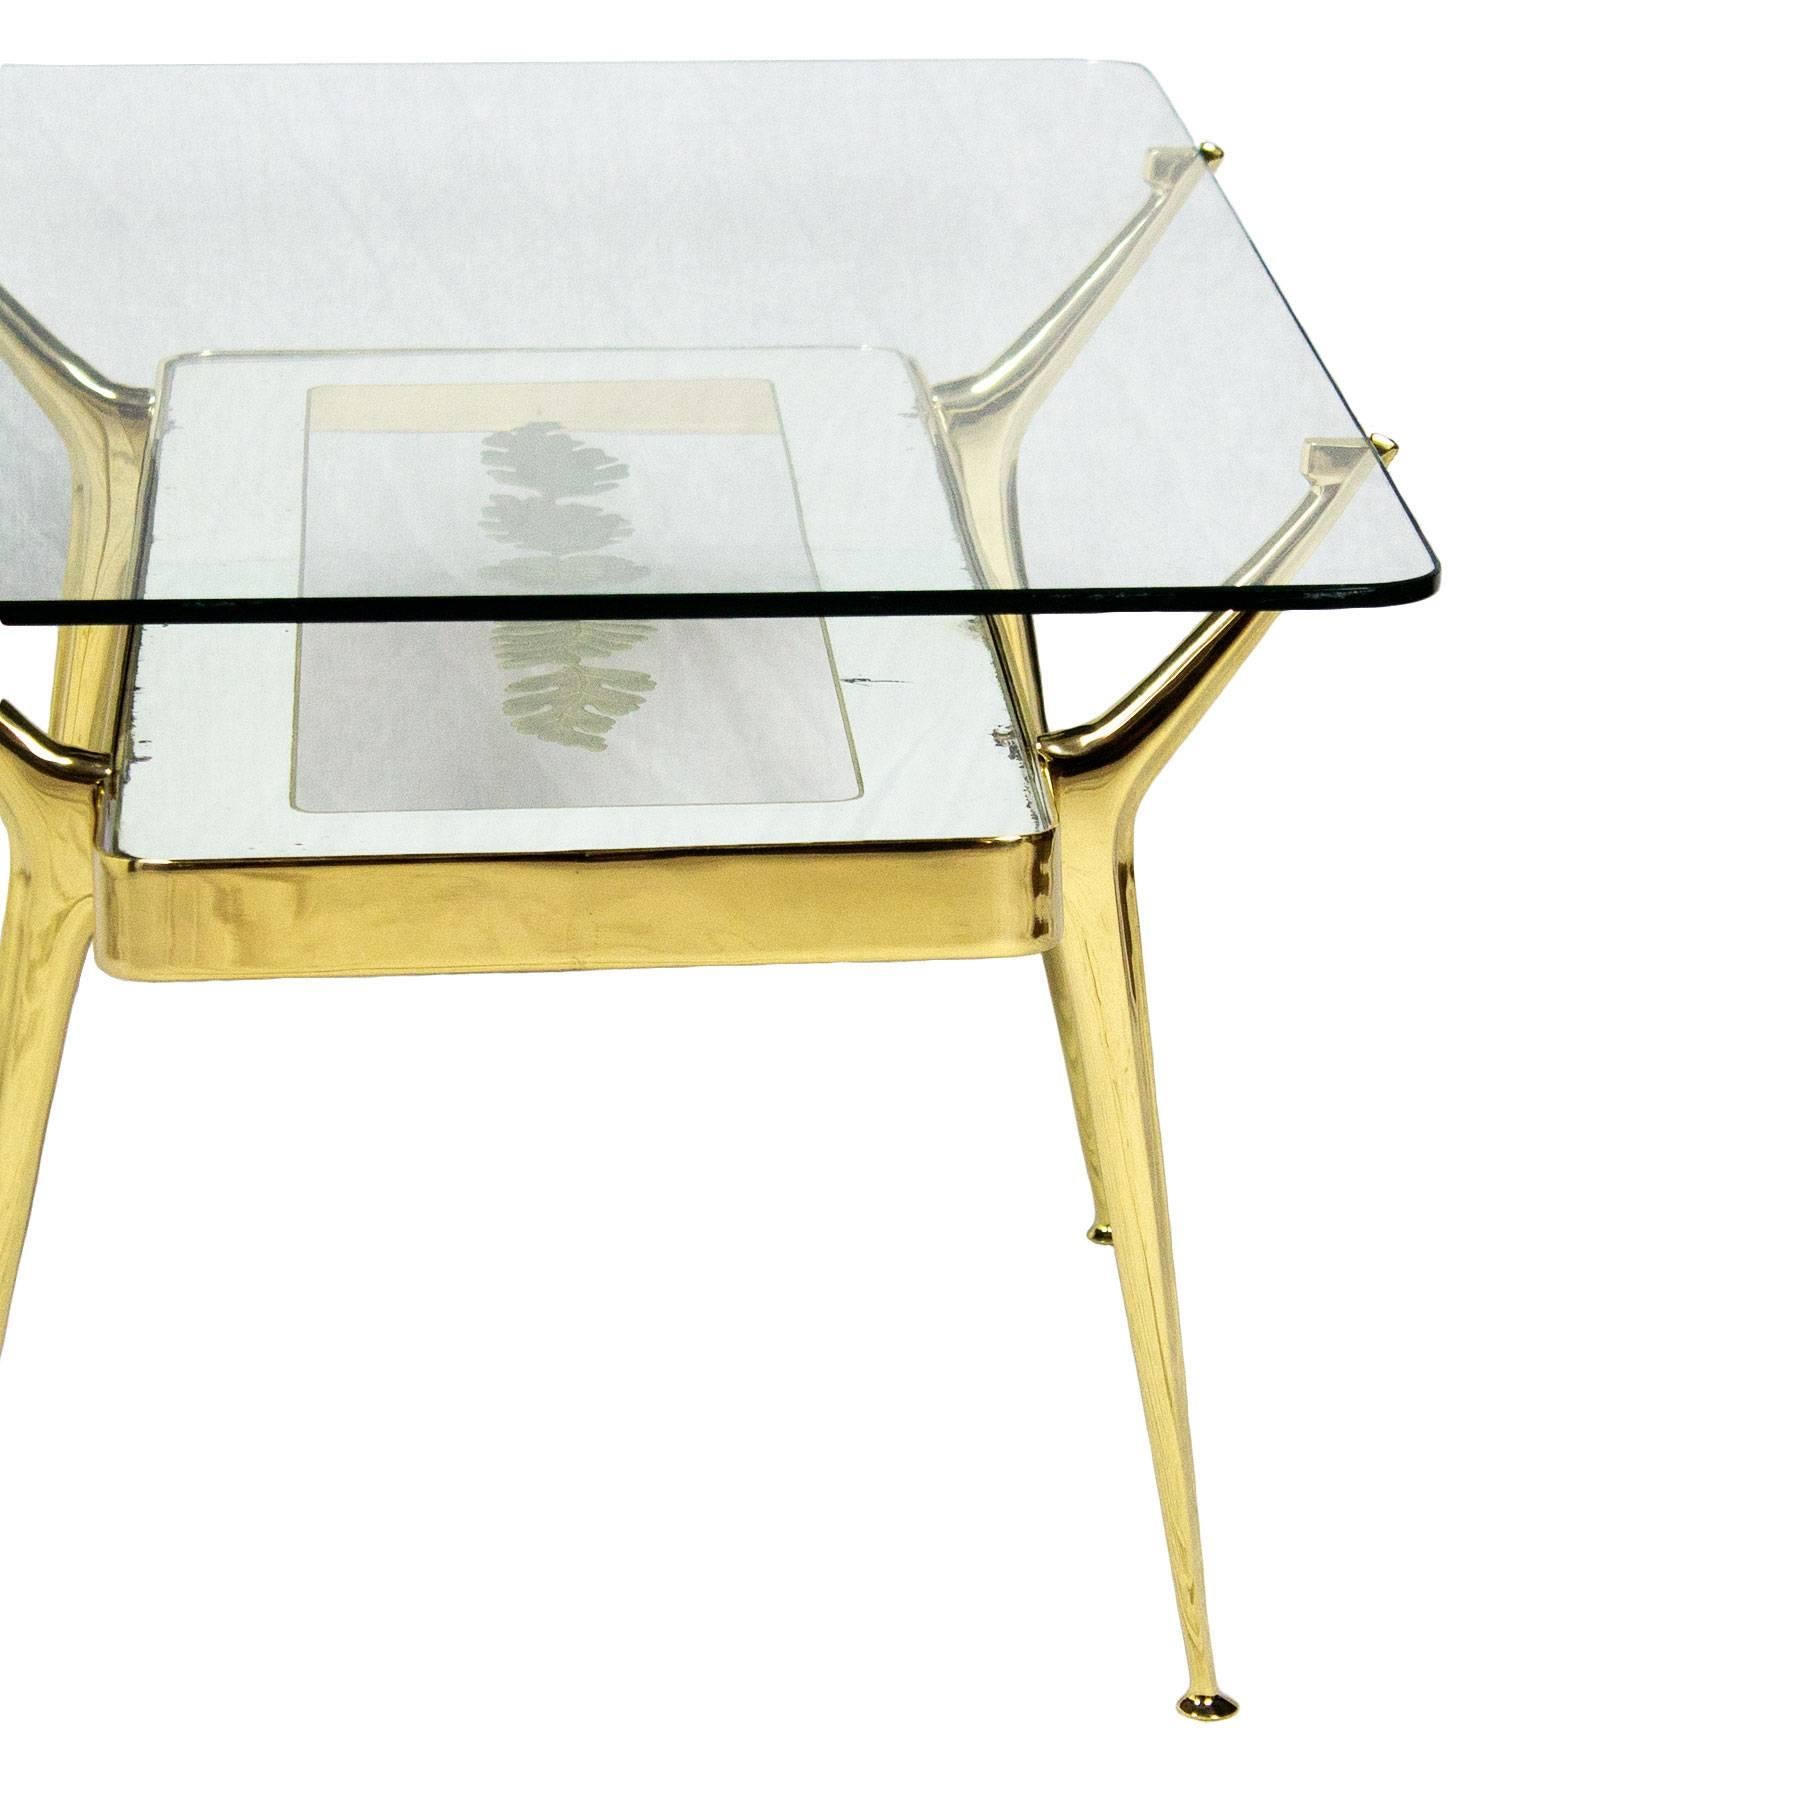 Mid-20th Century Mid-Century Modern Coffee Table by Cesare Lacca, Mirrored Etched Glass - Italy For Sale